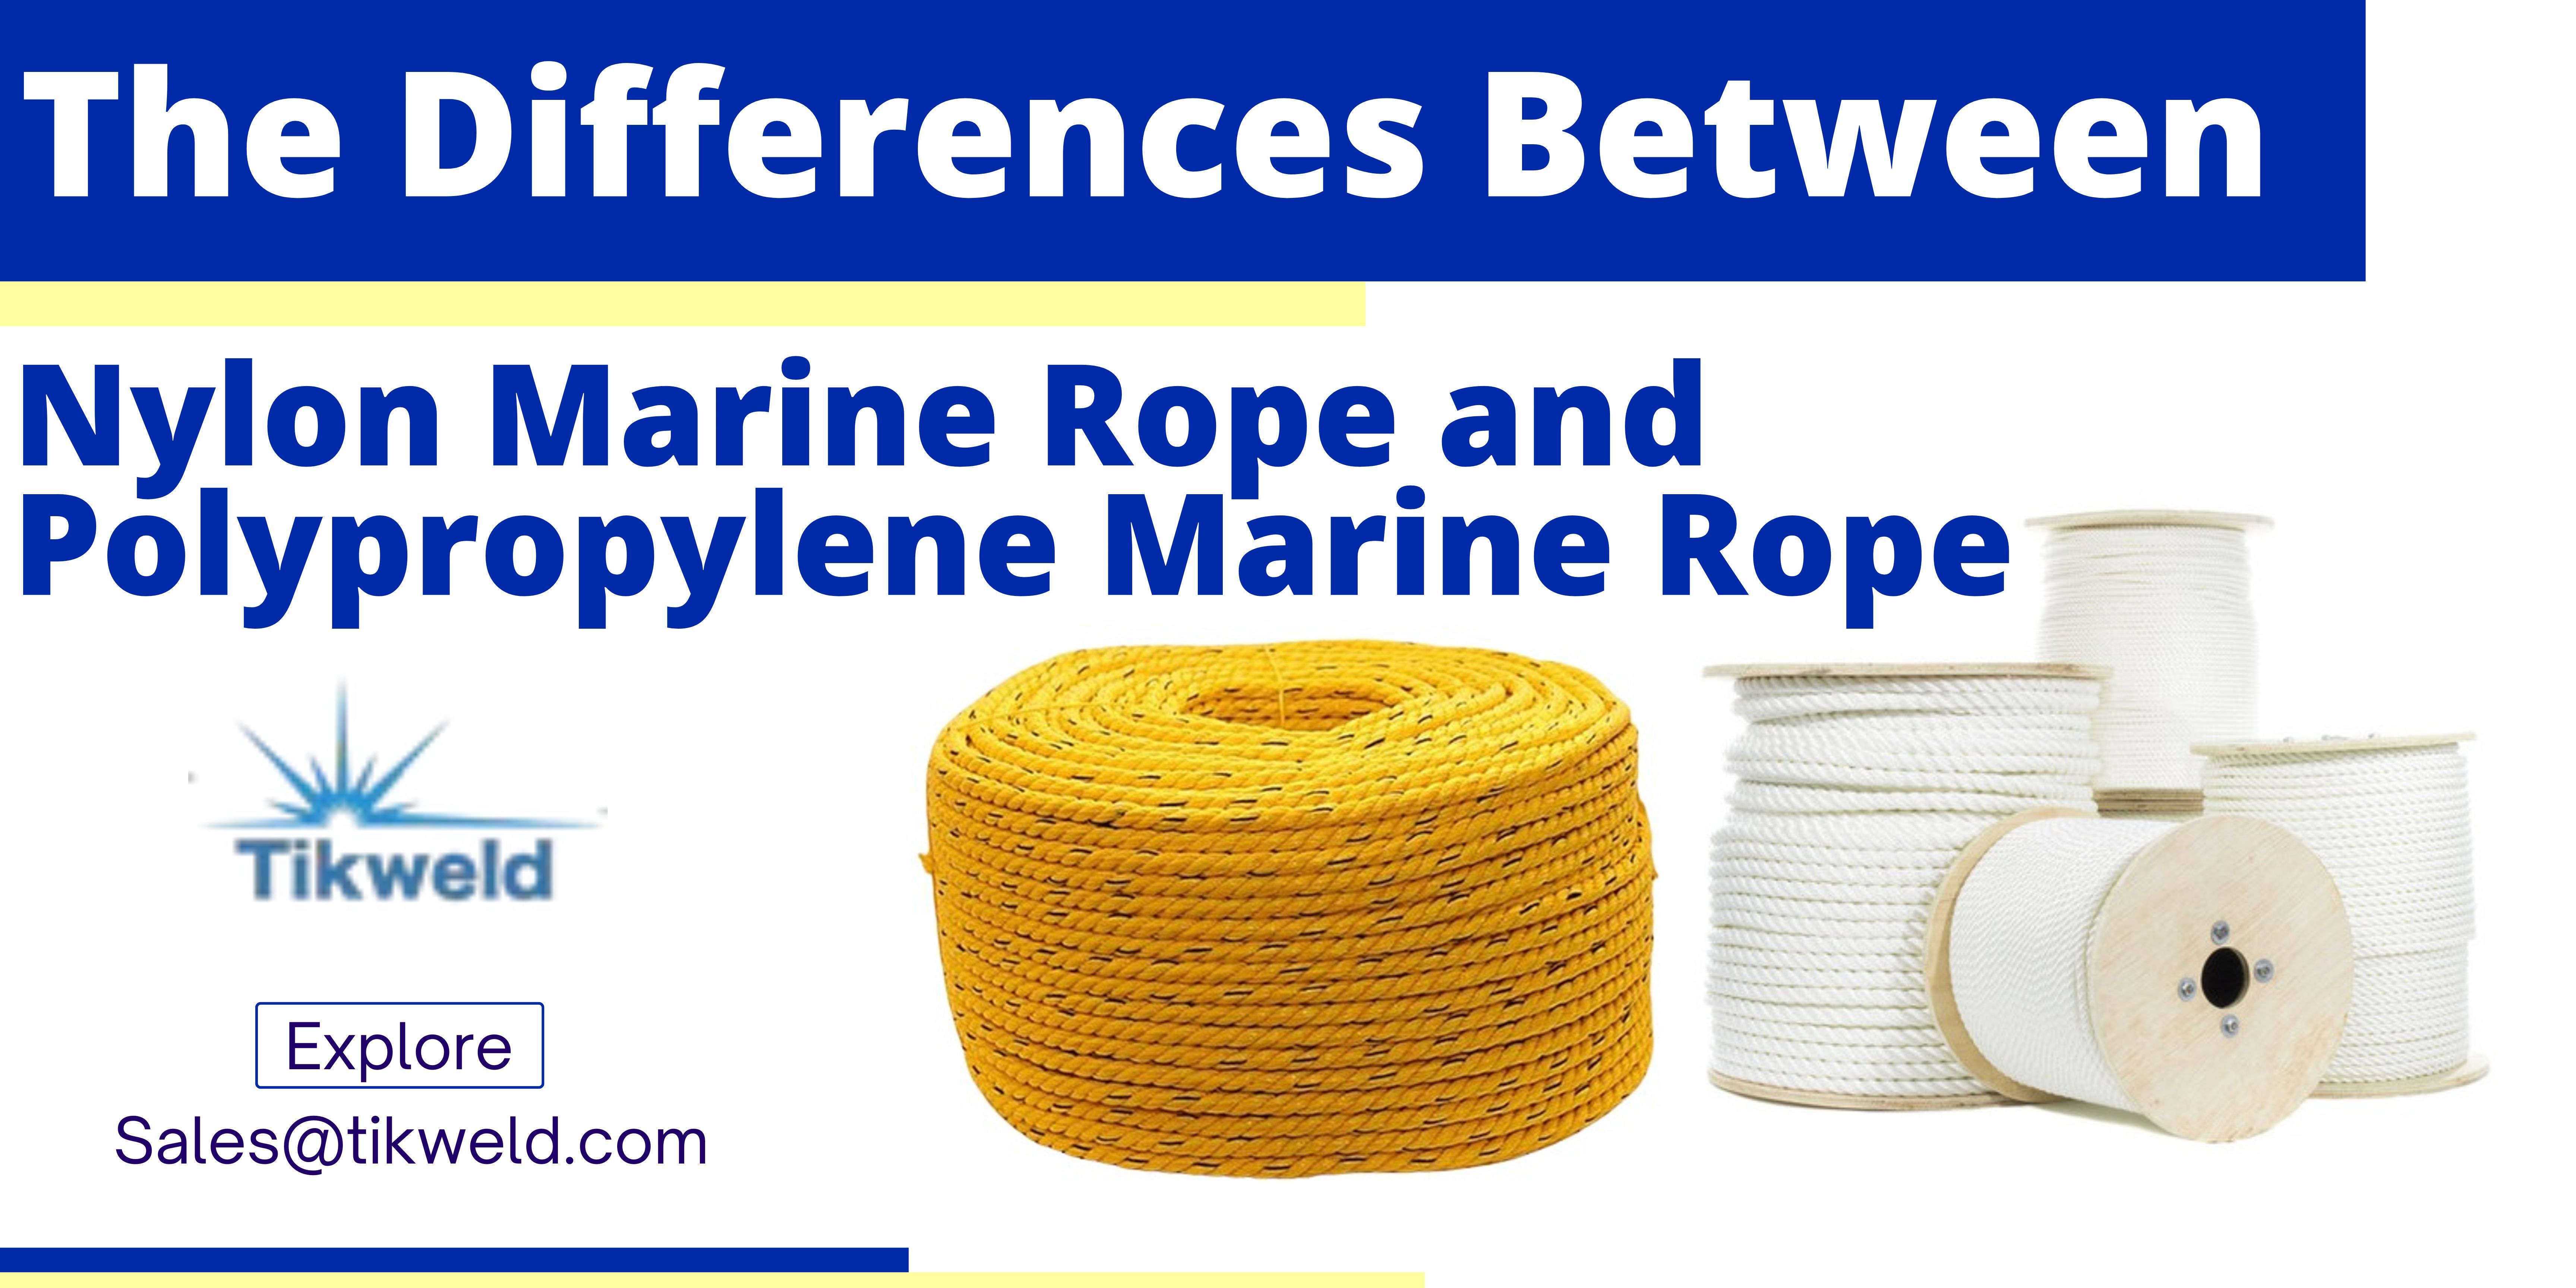 nylon twine products for sale